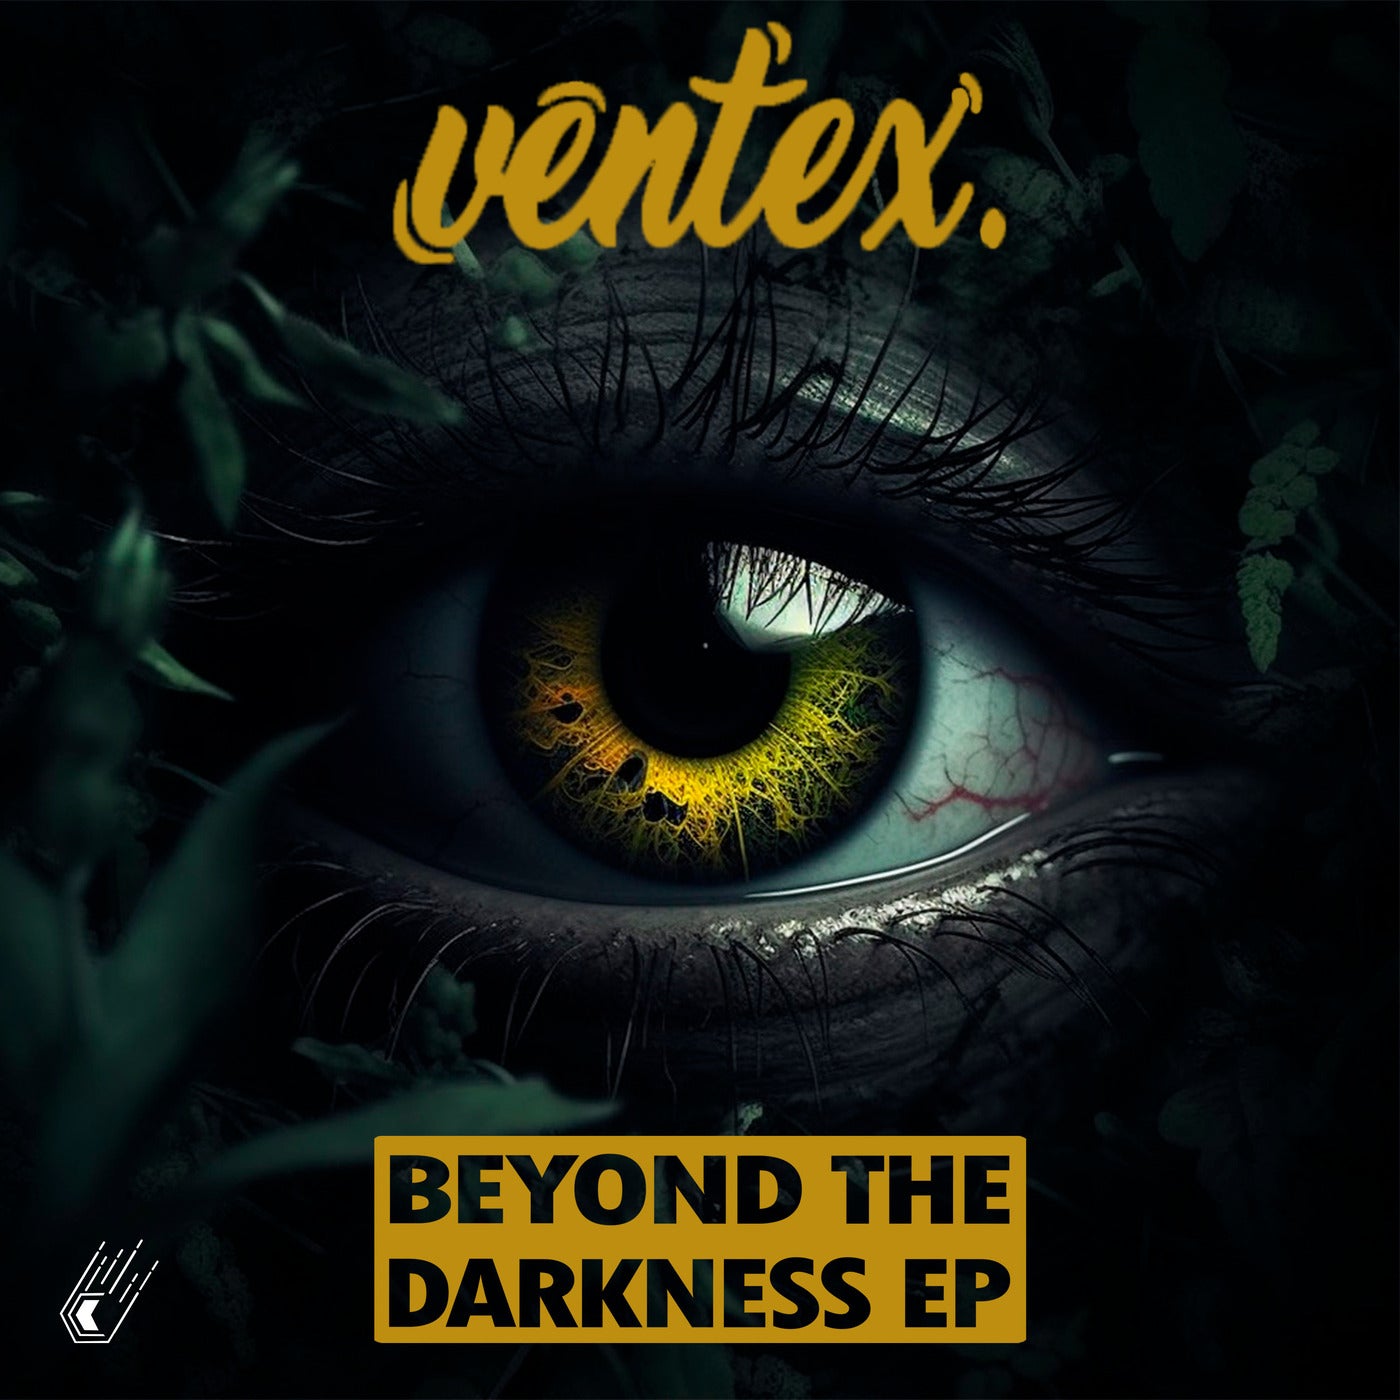 Beyond The Darkness EP